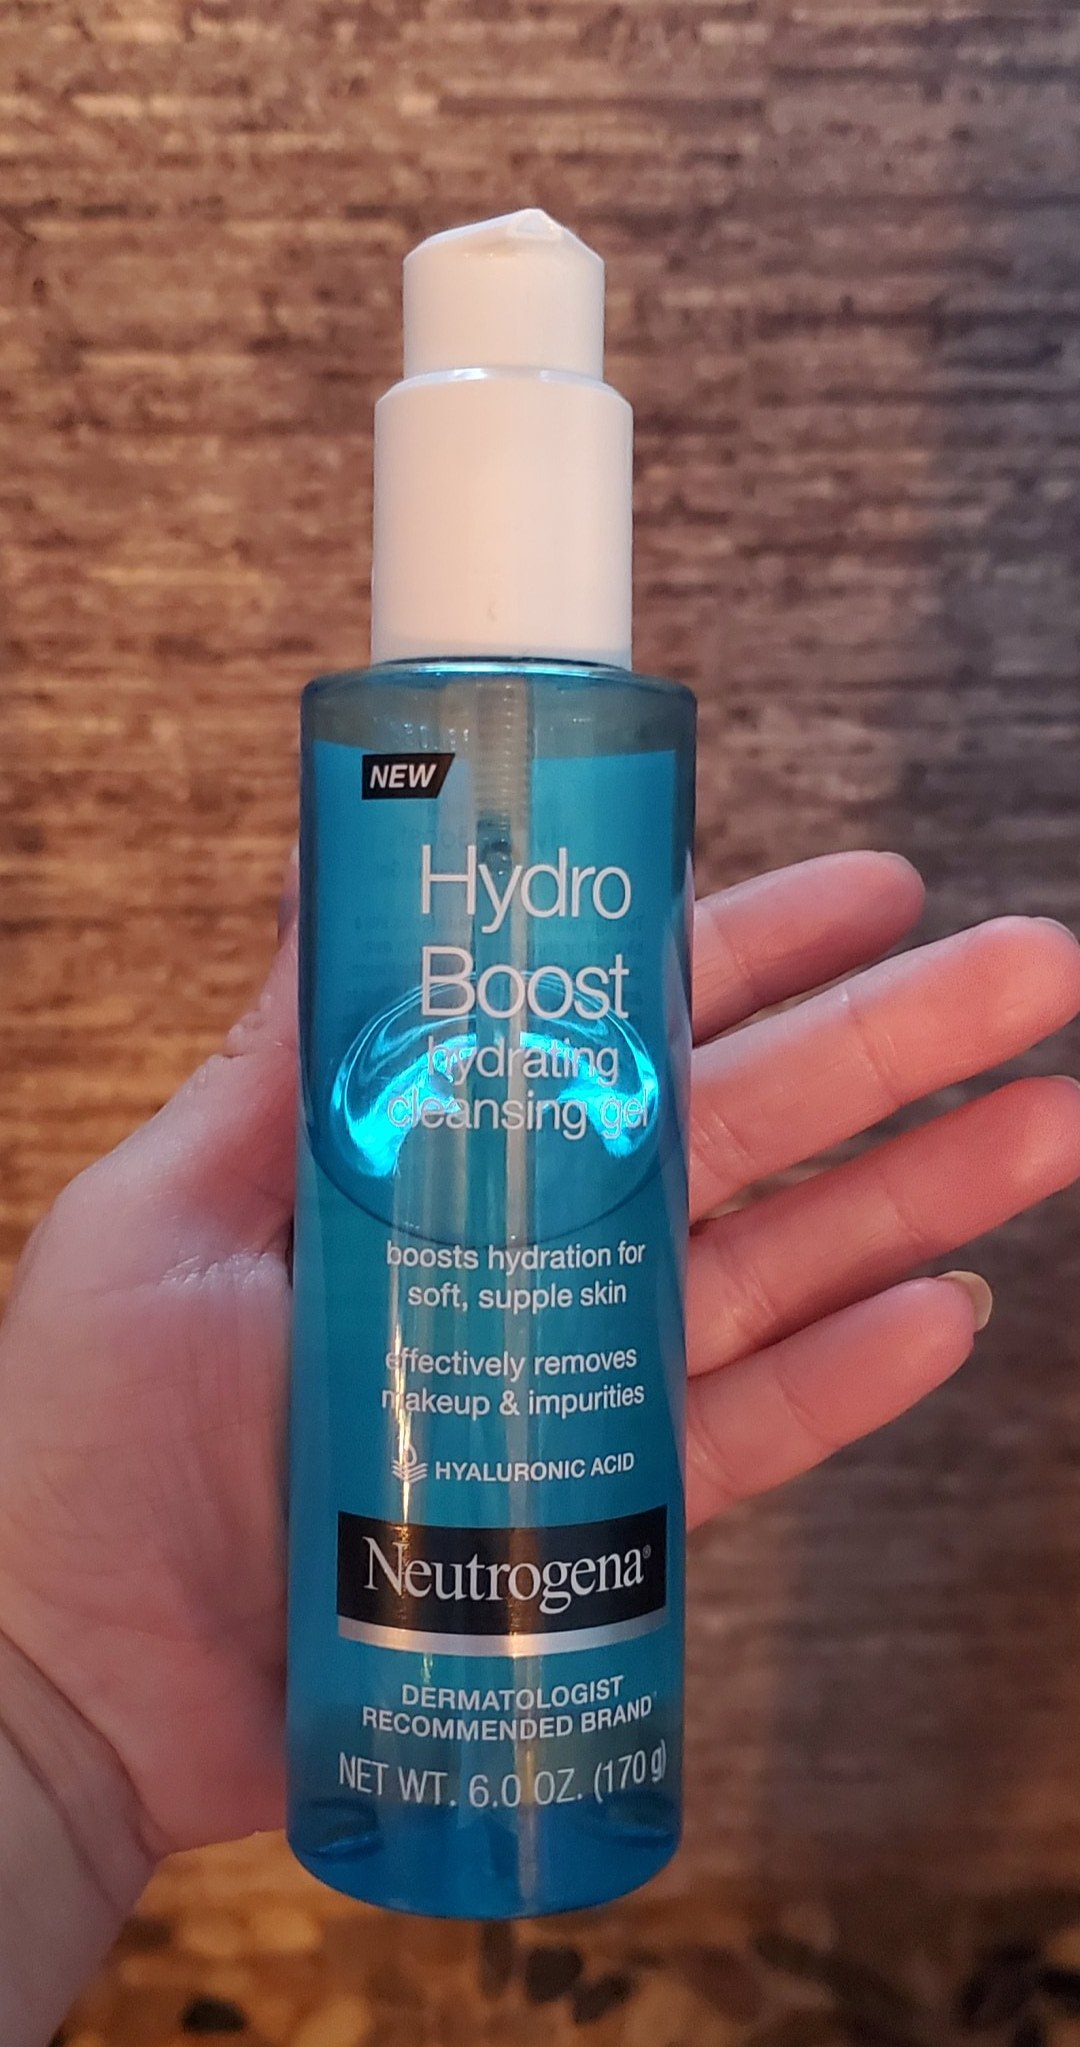 hydro boost hydrating cleansing gel review